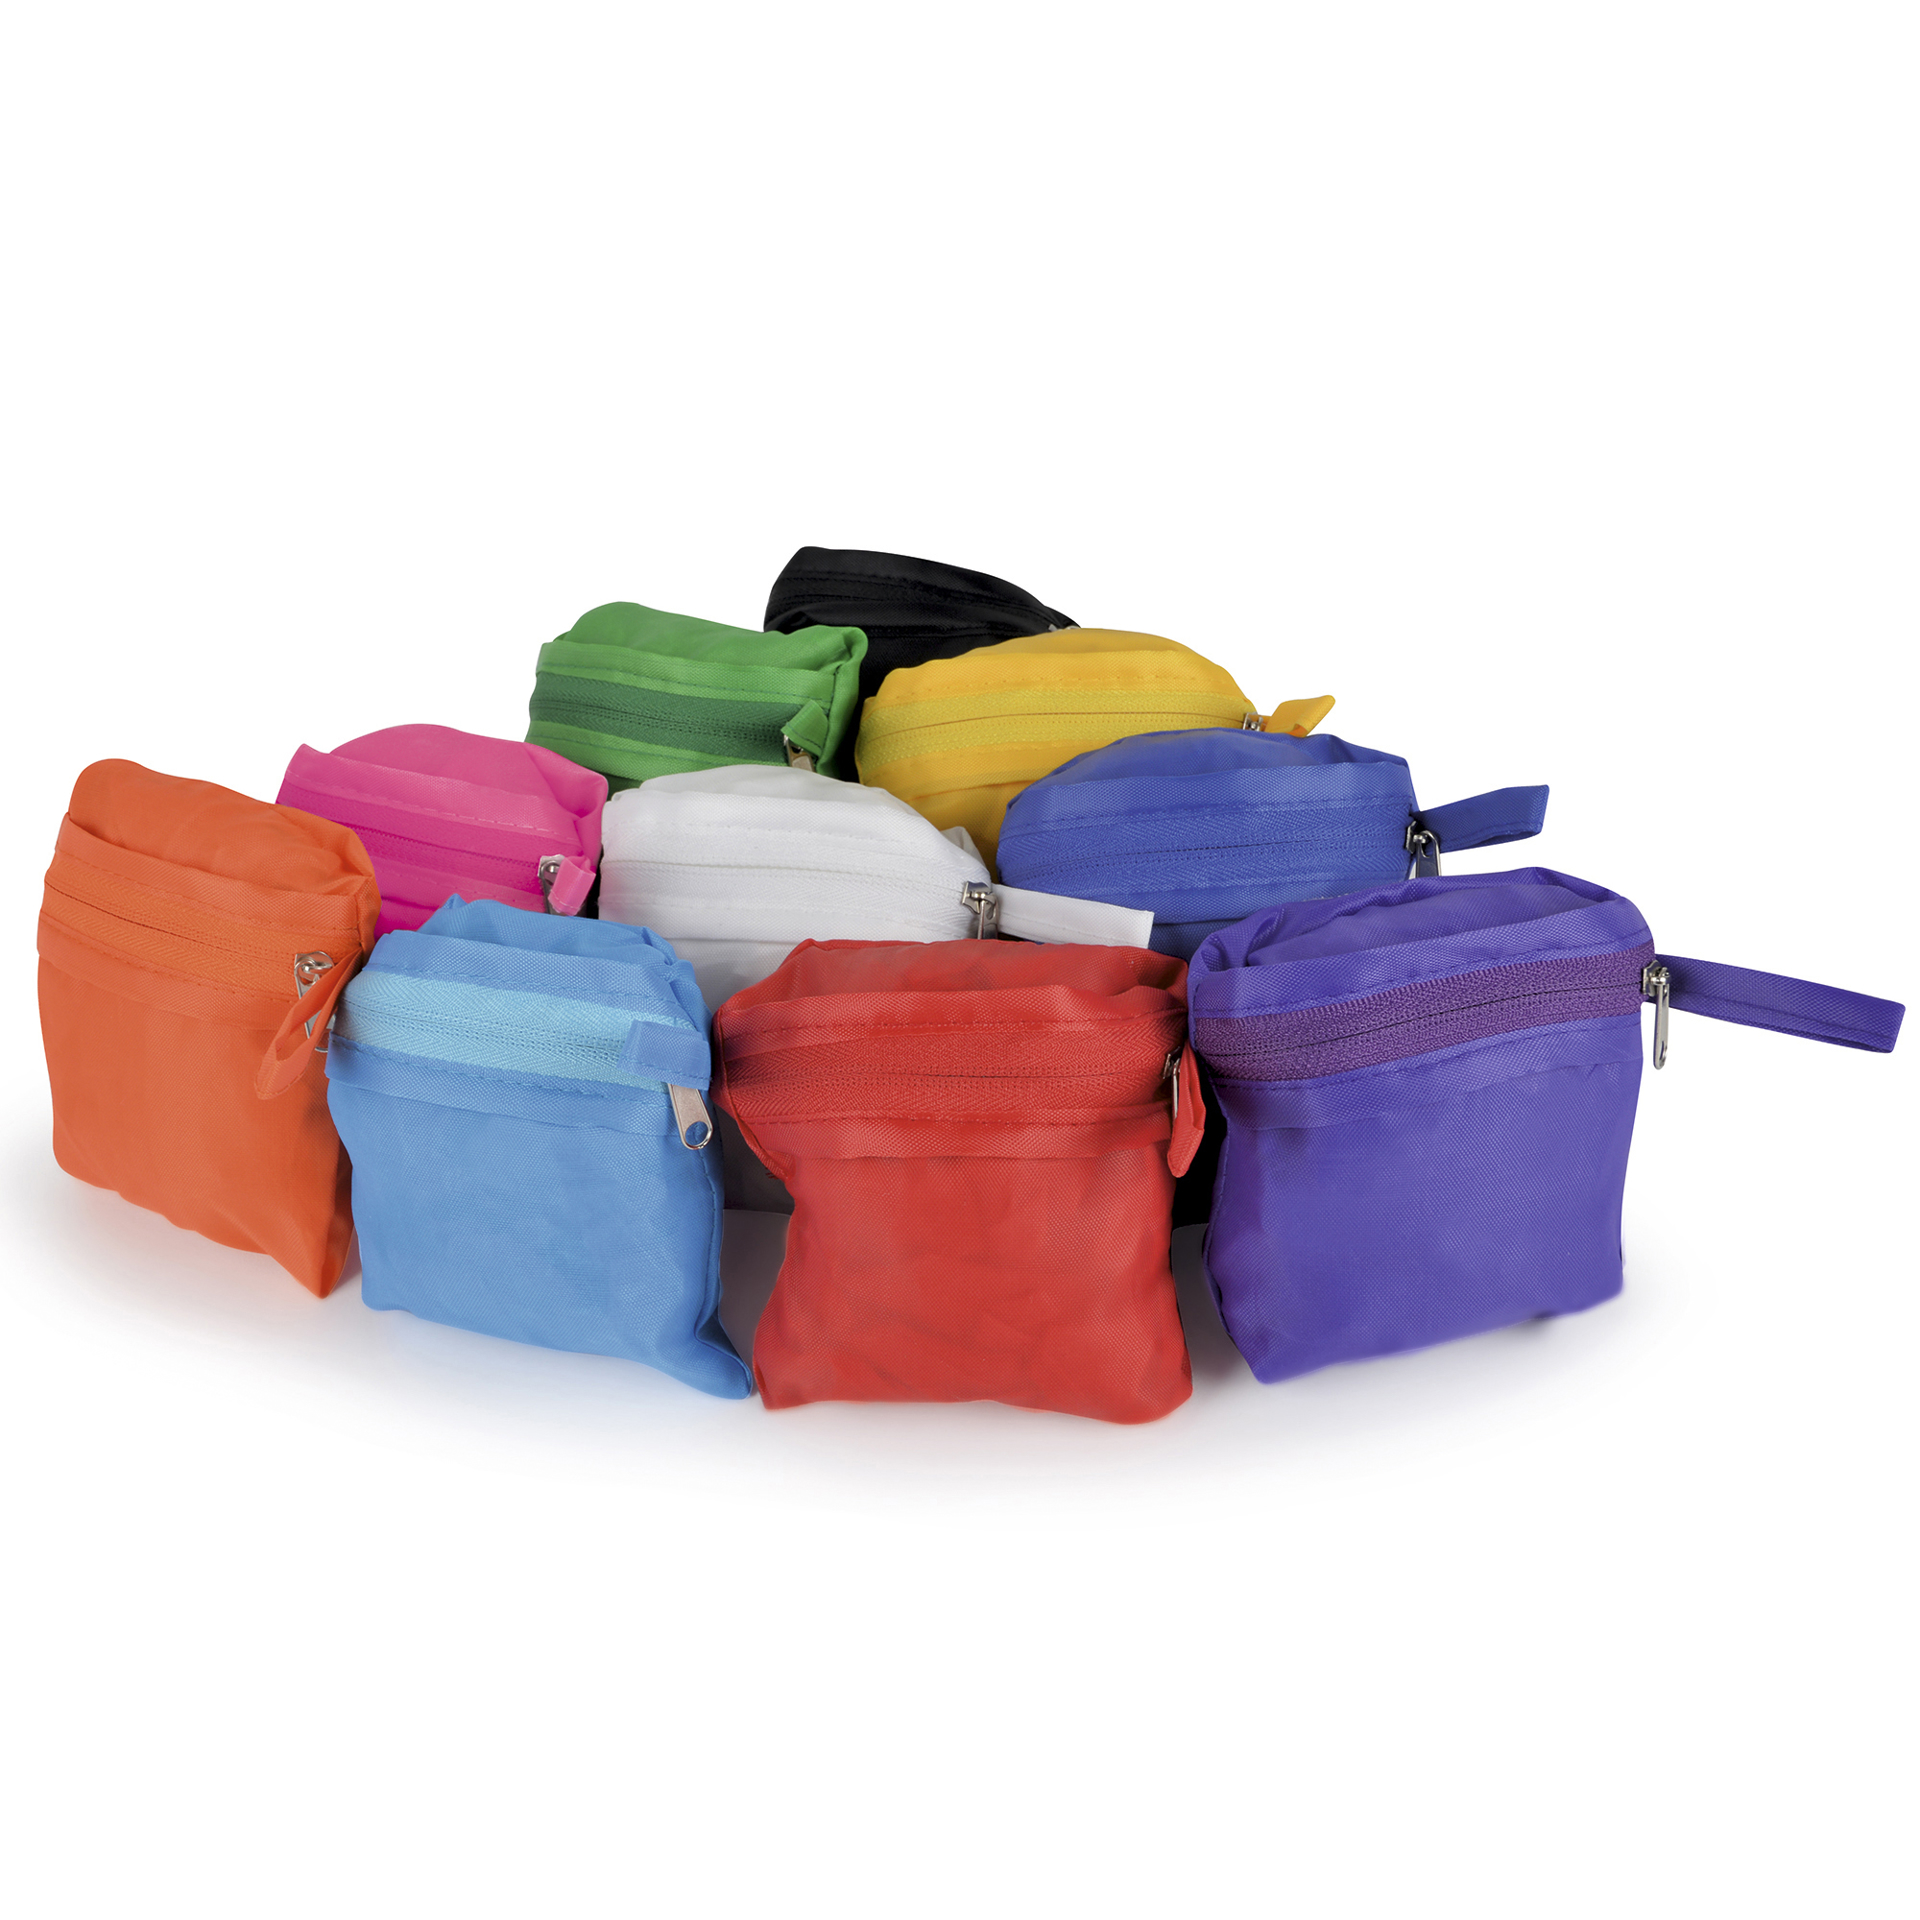 Folding shopping bags in a range of colours